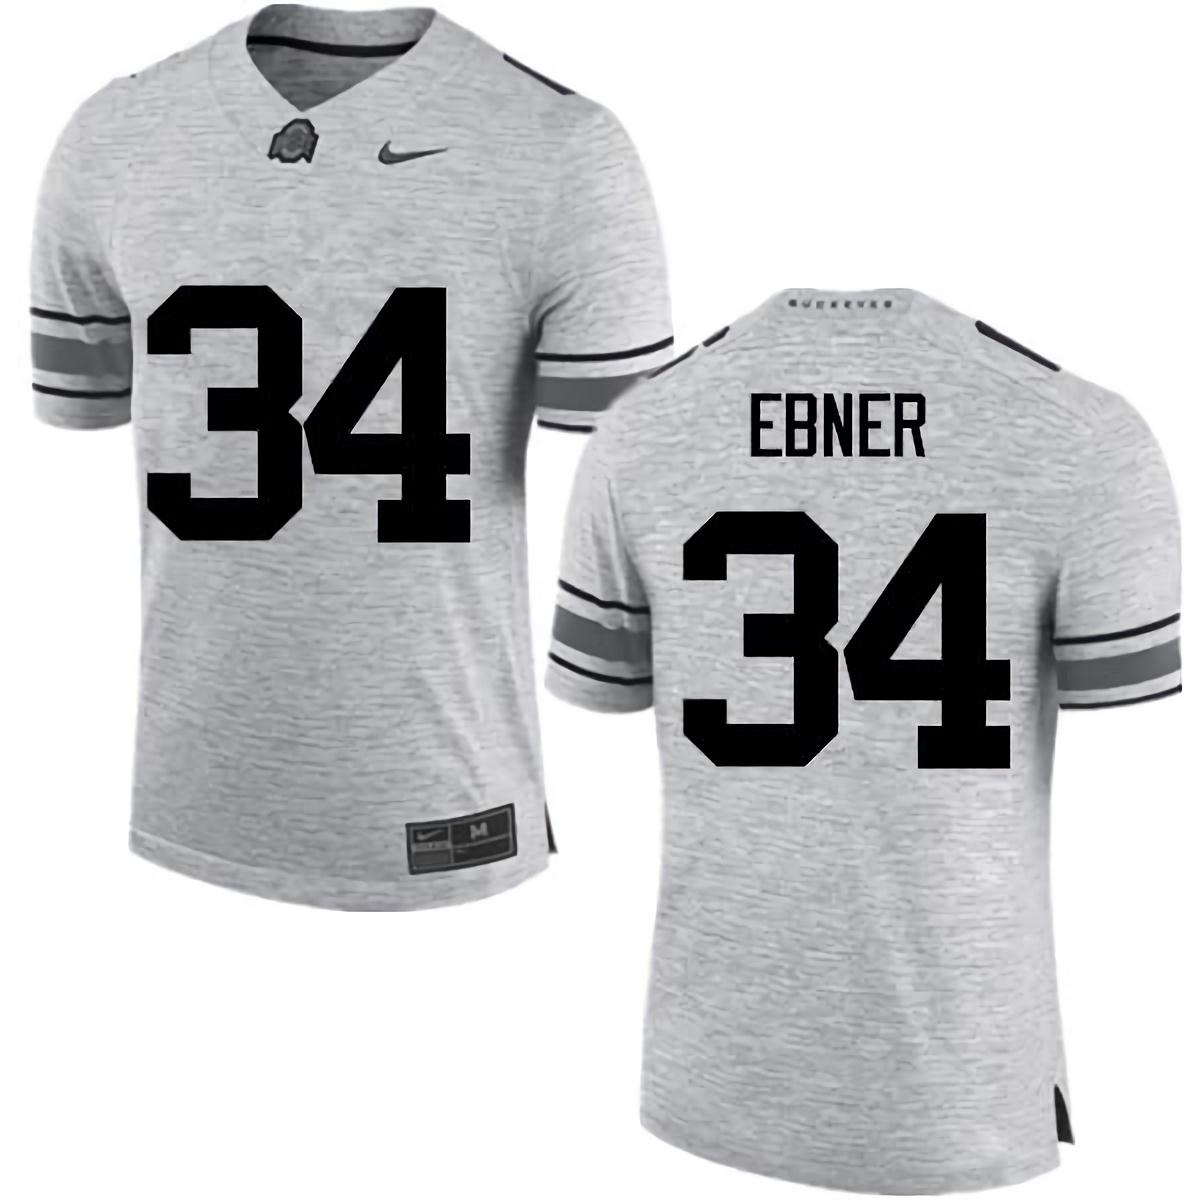 Nate Ebner Ohio State Buckeyes Men's NCAA #34 Nike Gray College Stitched Football Jersey NPX3656LT